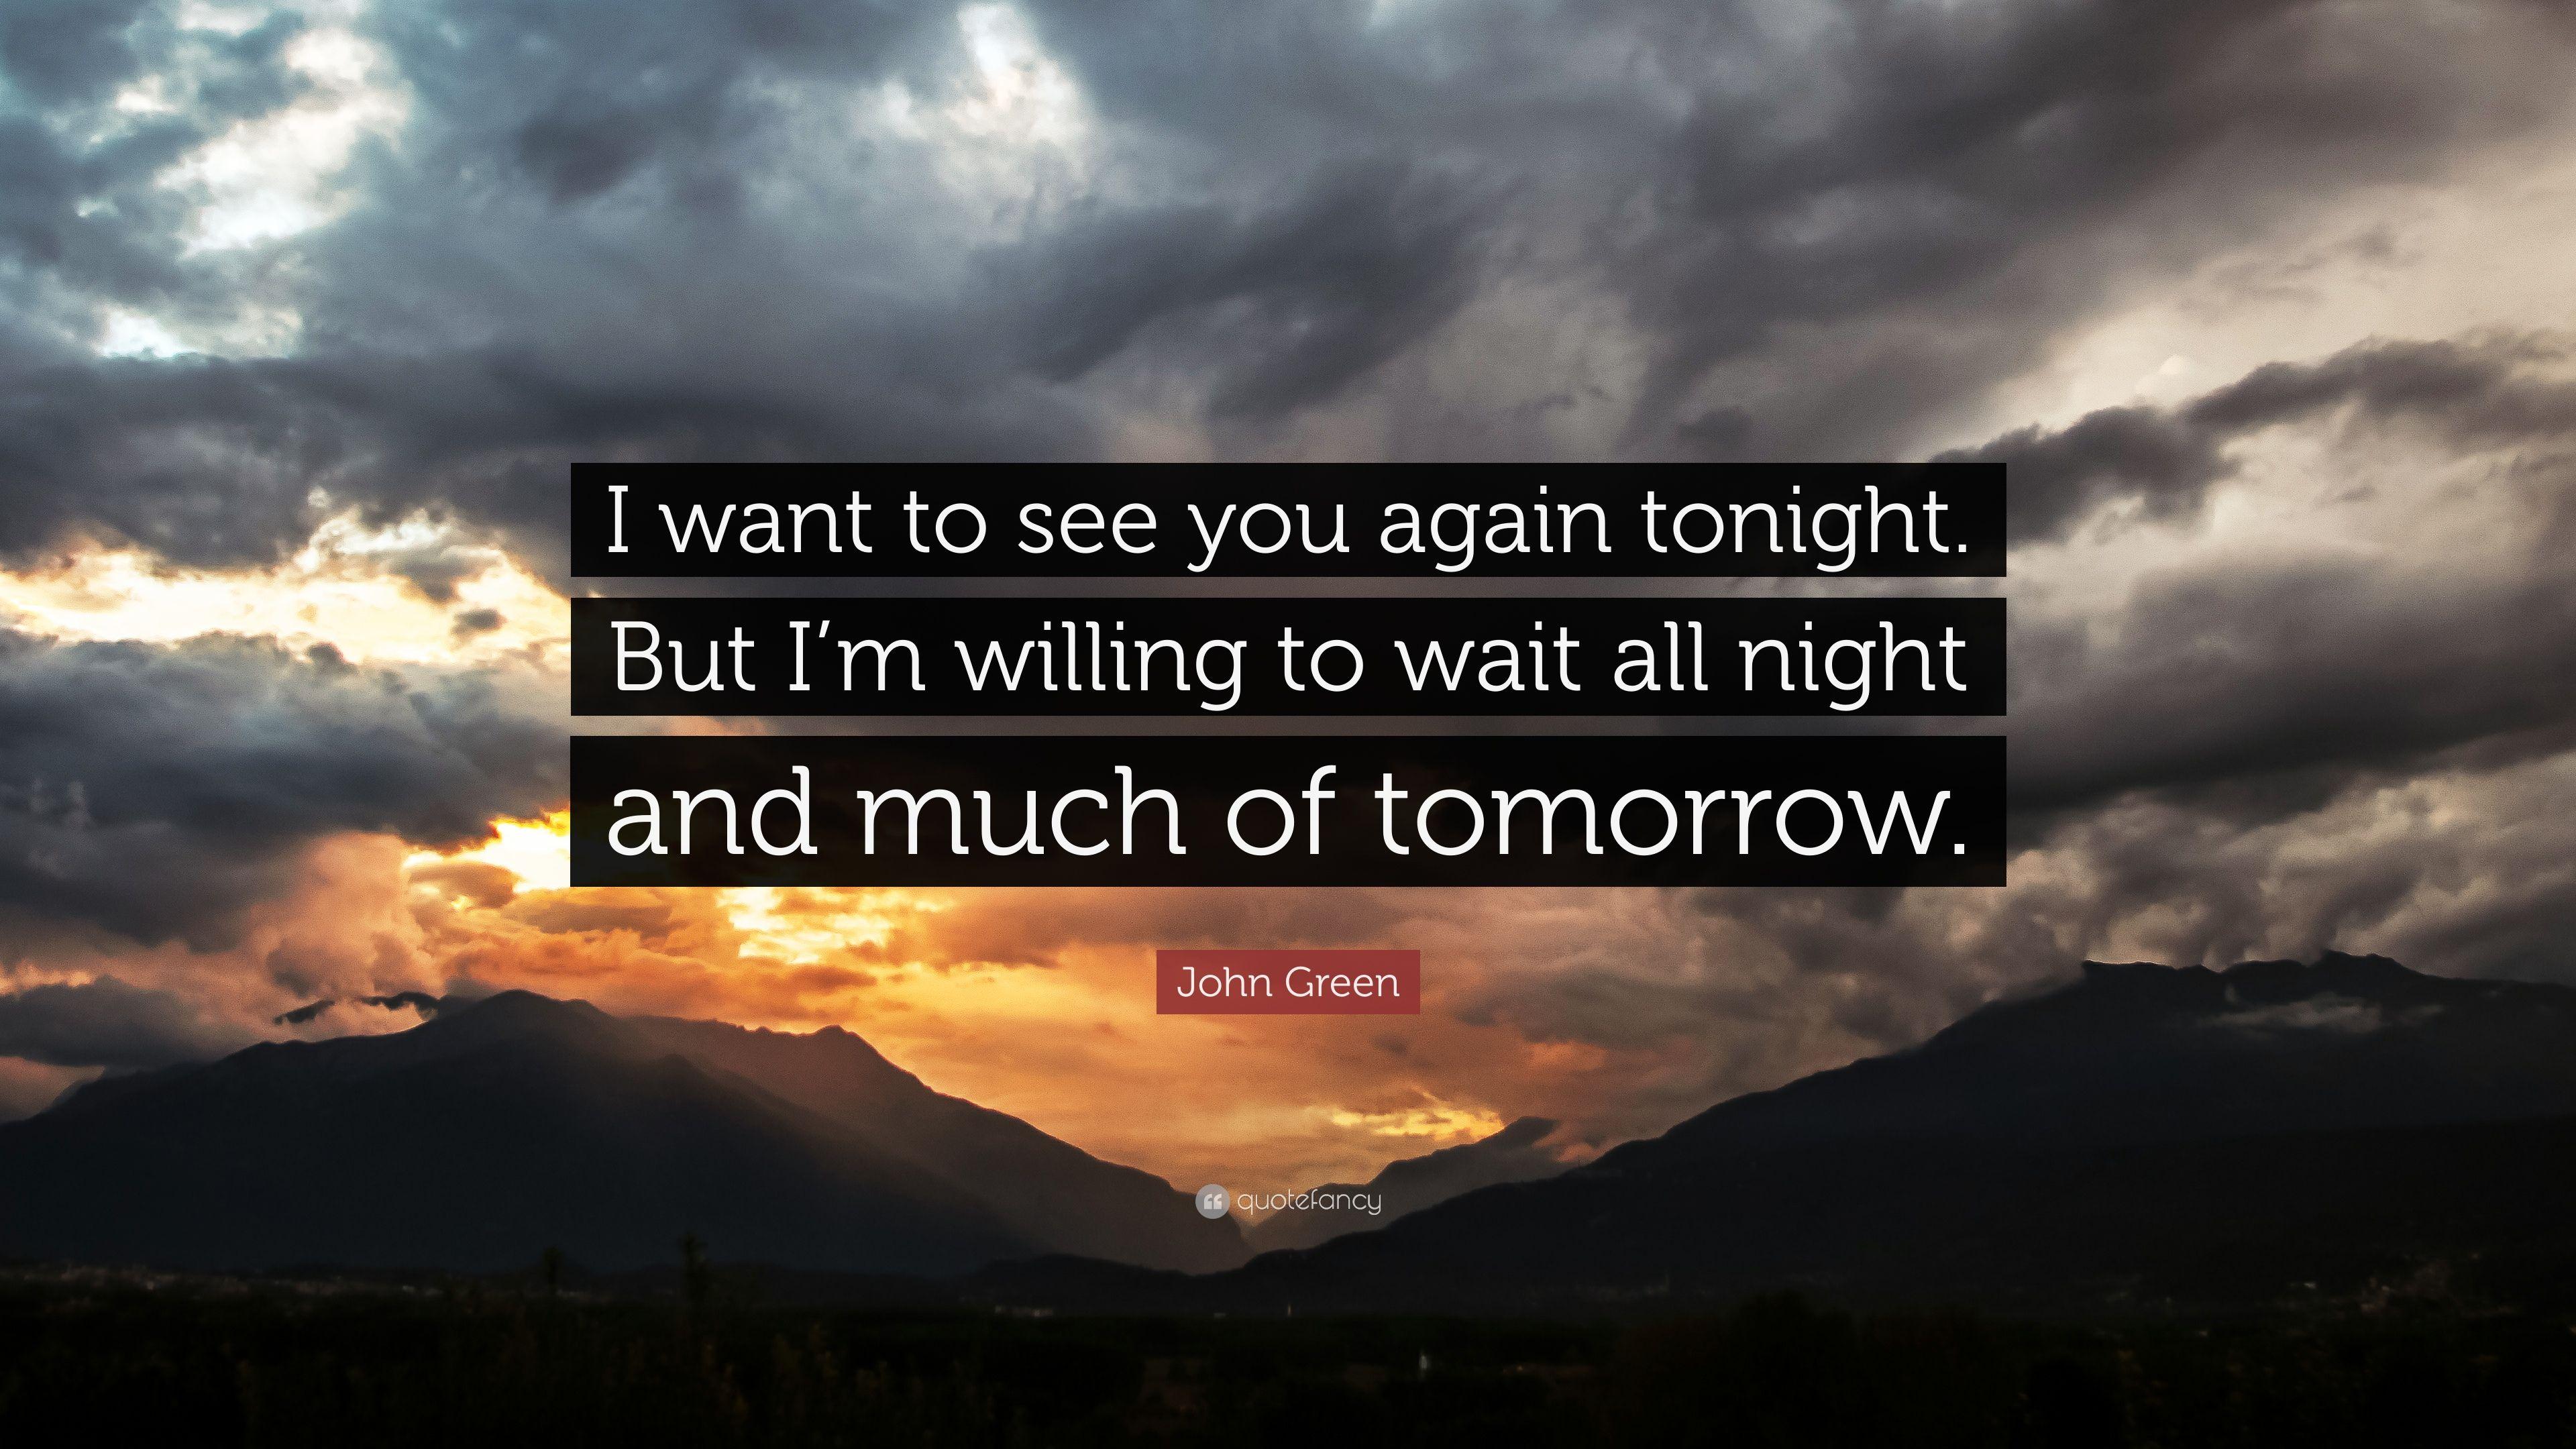 John Green Quote: “I want to see you again tonight. But I'm